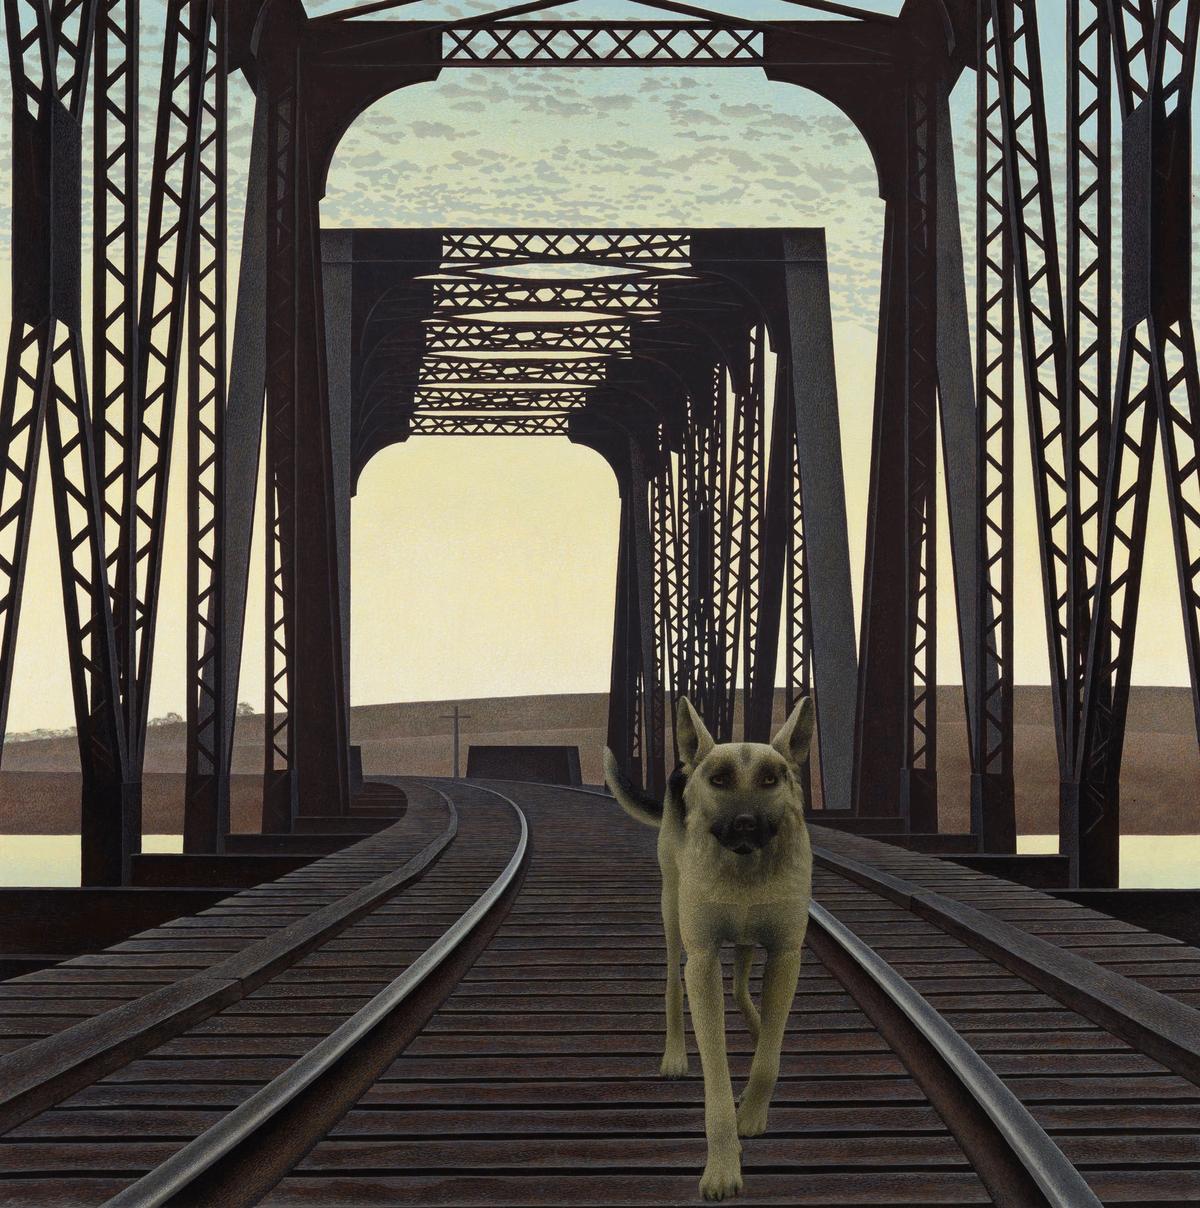 Alexander Colville's Dog and Bridge (1976), made $2m ($2.4m with fees) 